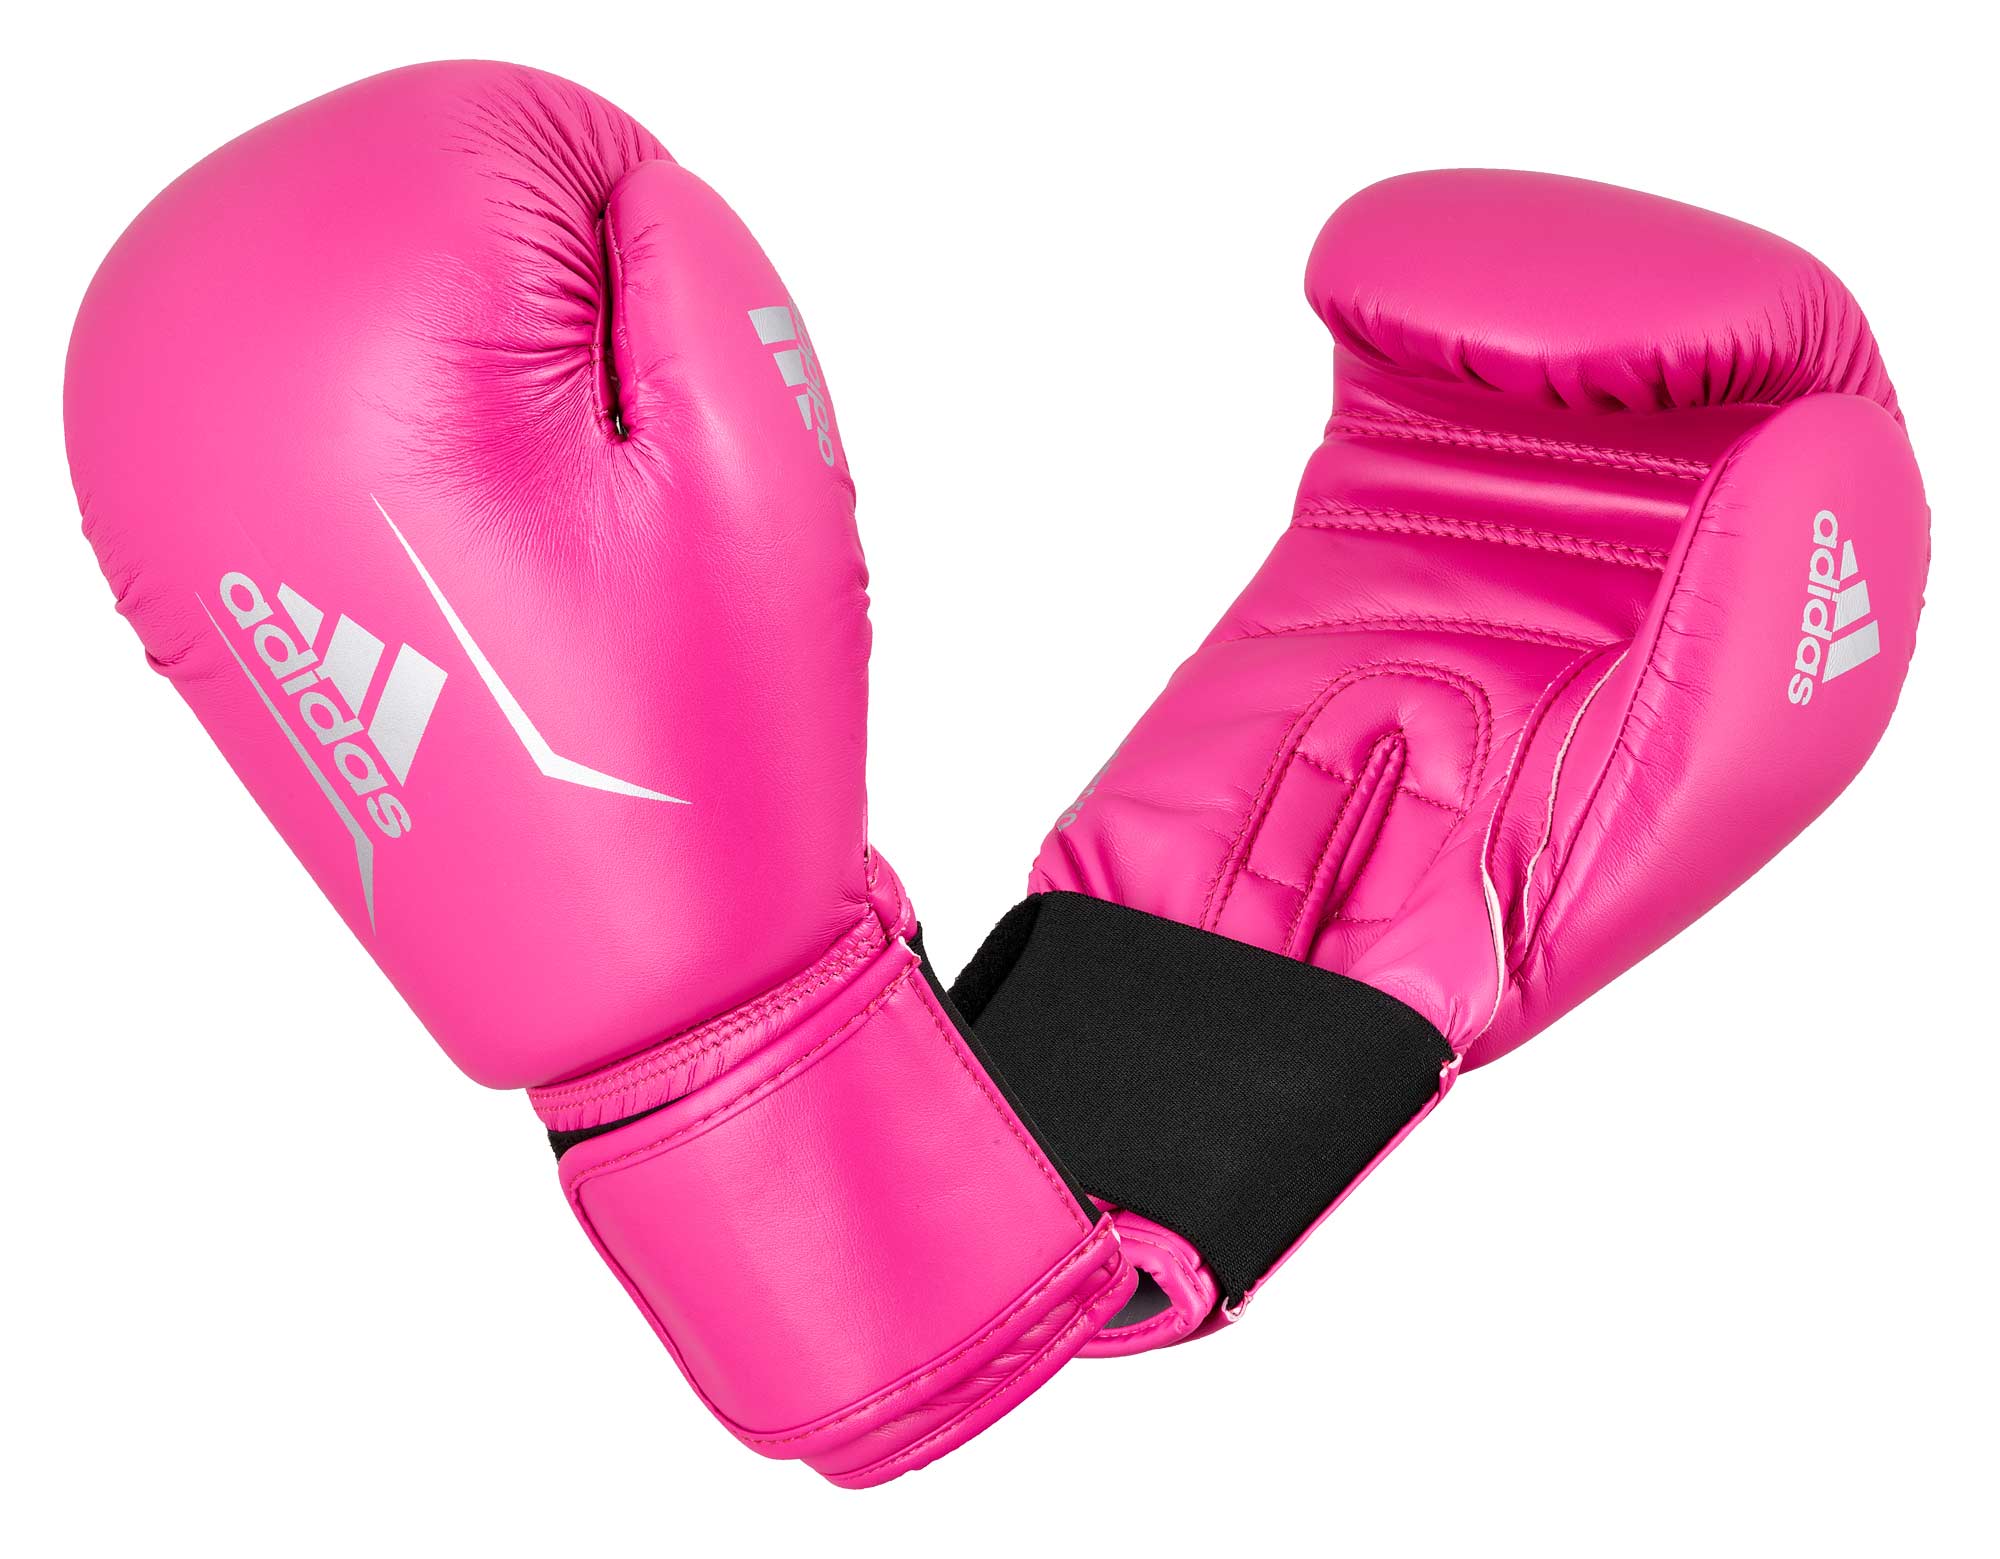 ADIDAS Kinder Boxhandschuhe Speed 50 pink/silver | Kickbox Handschuhe |  Boxhandschuhe | Ausrüstung